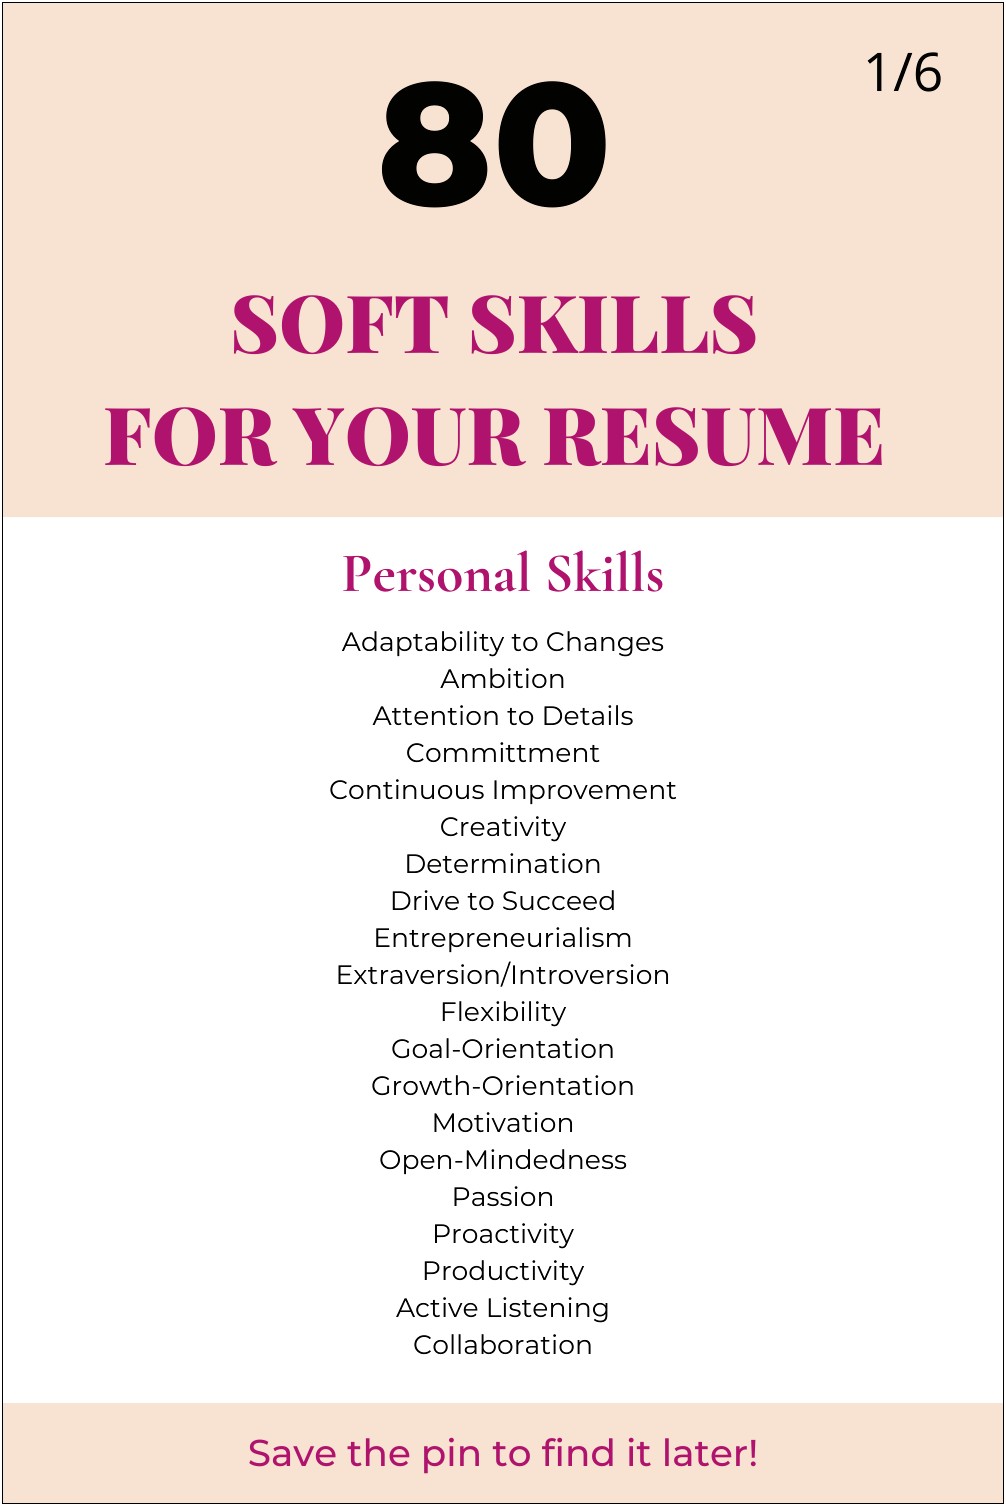 List Of Soft Skills For Resumes